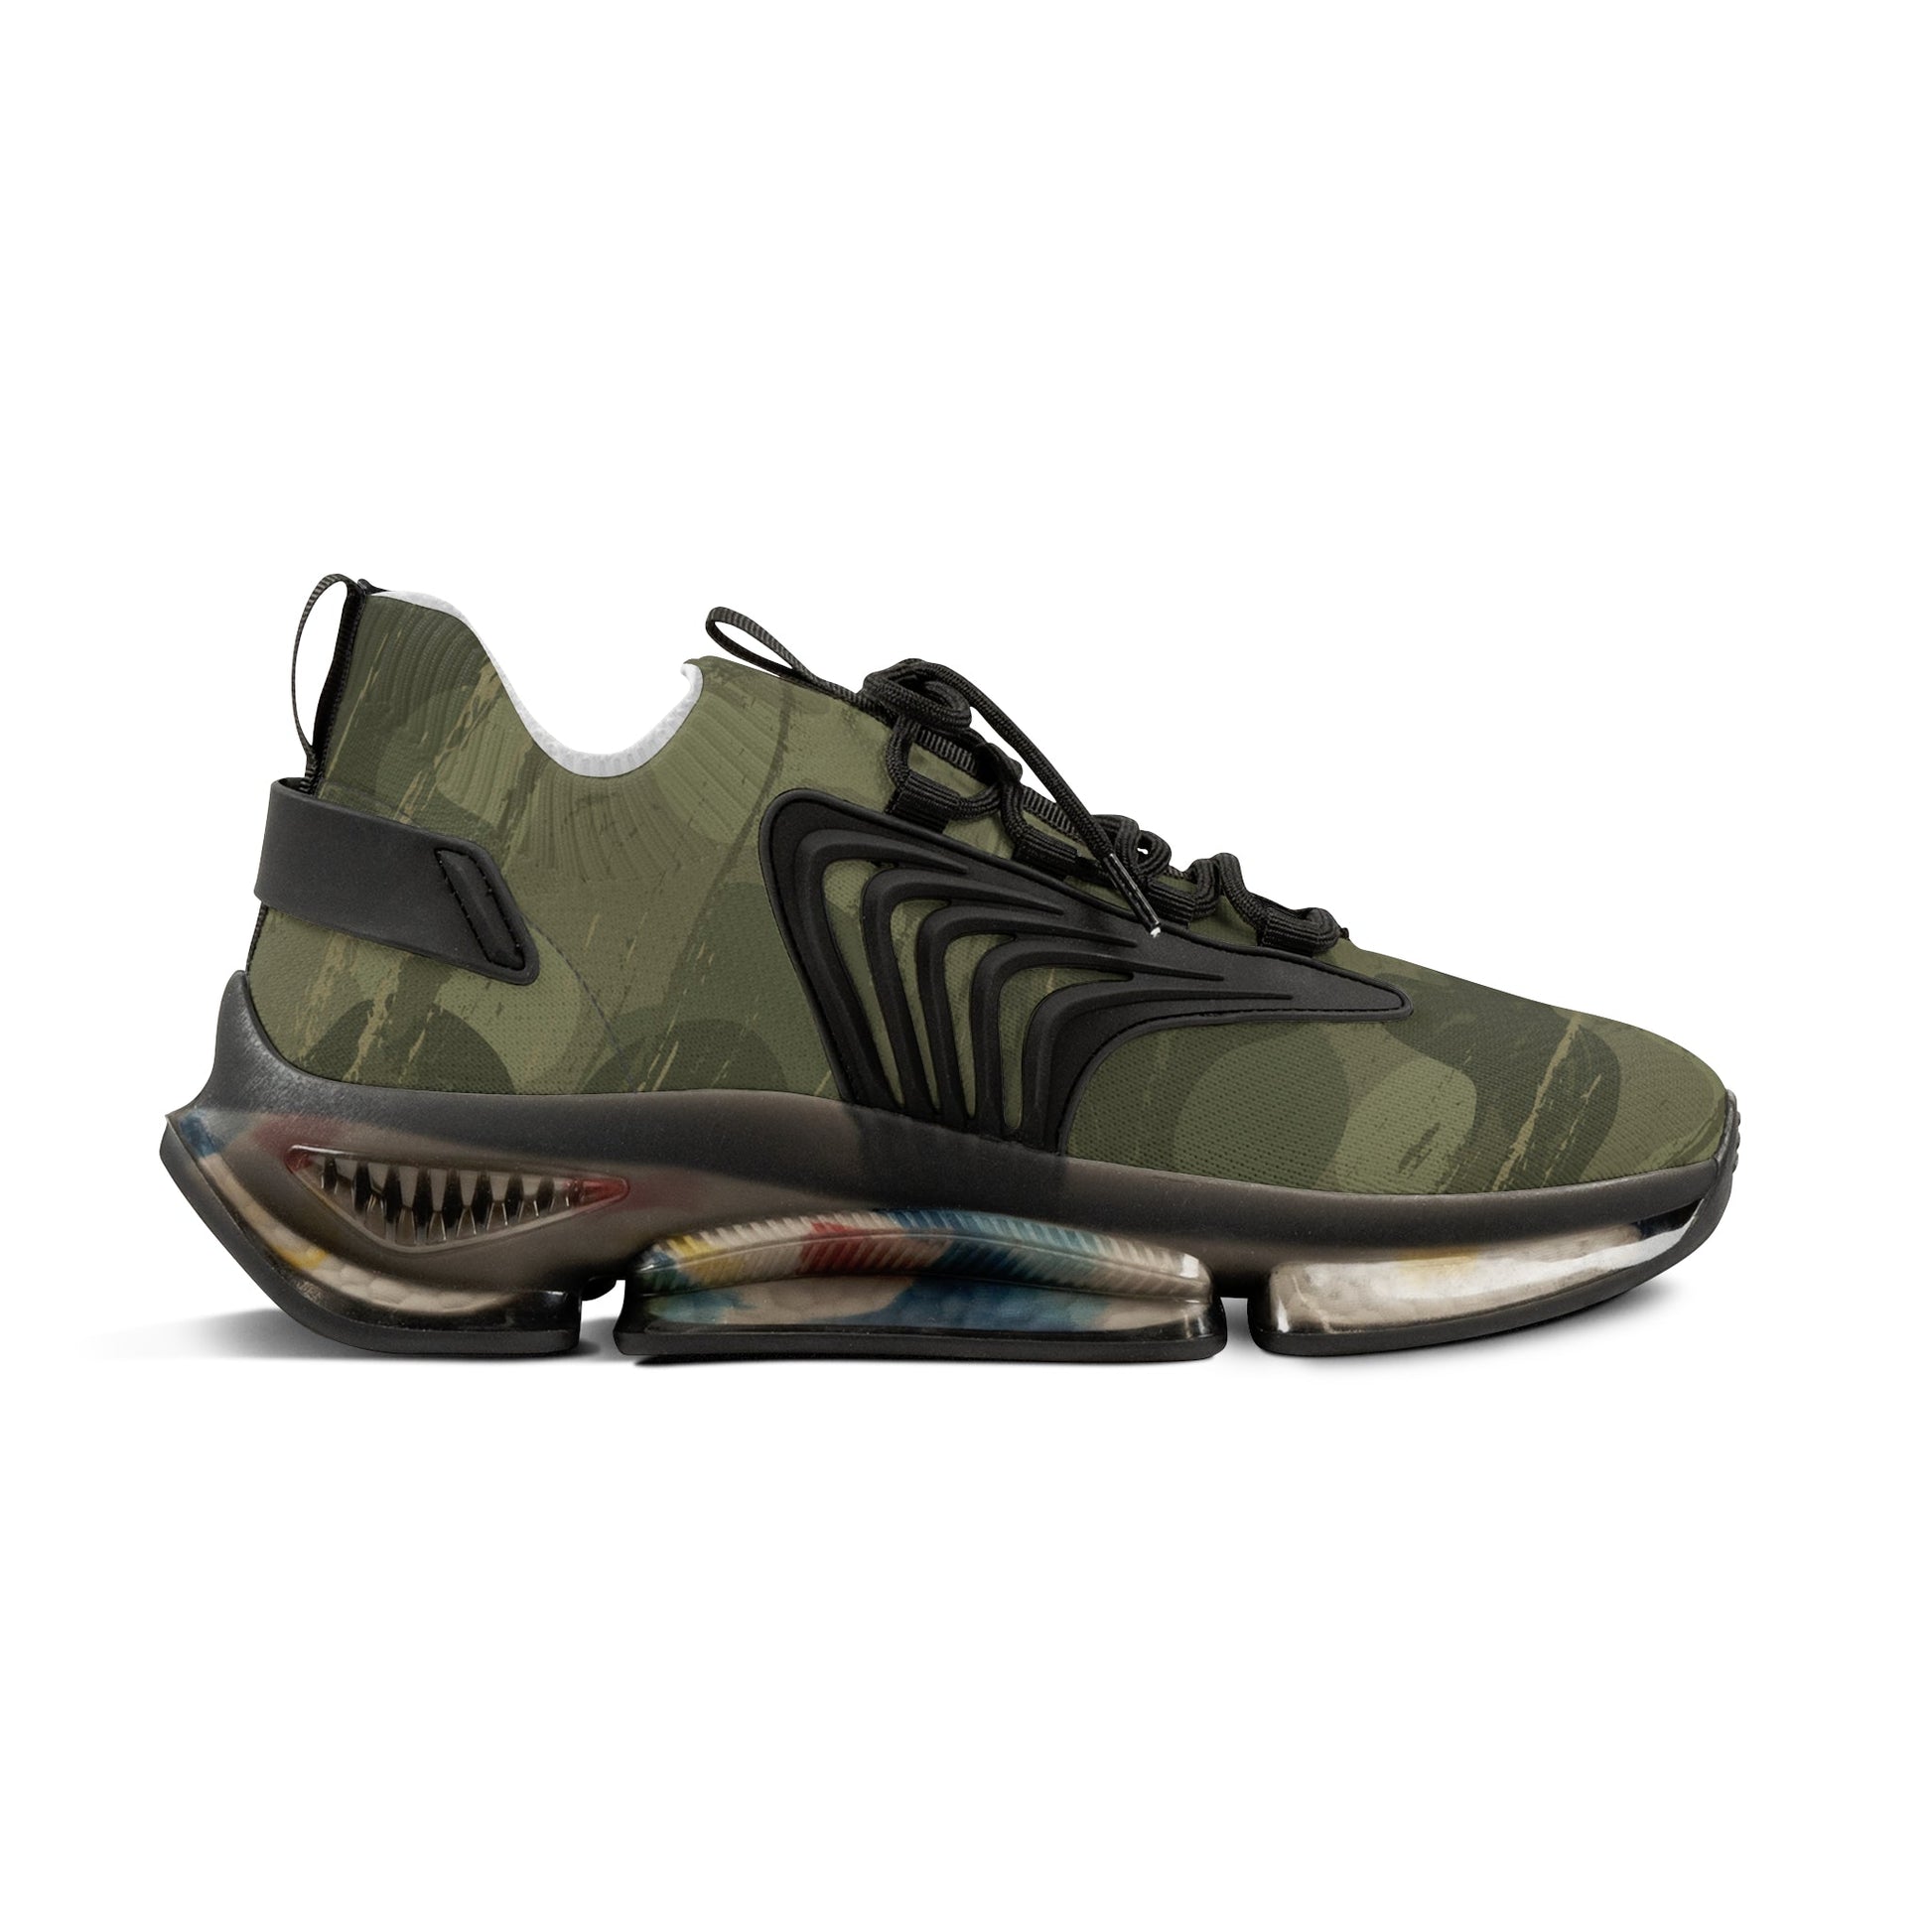 Shoes - Men's Mesh Sports Sneakers (Army Design)